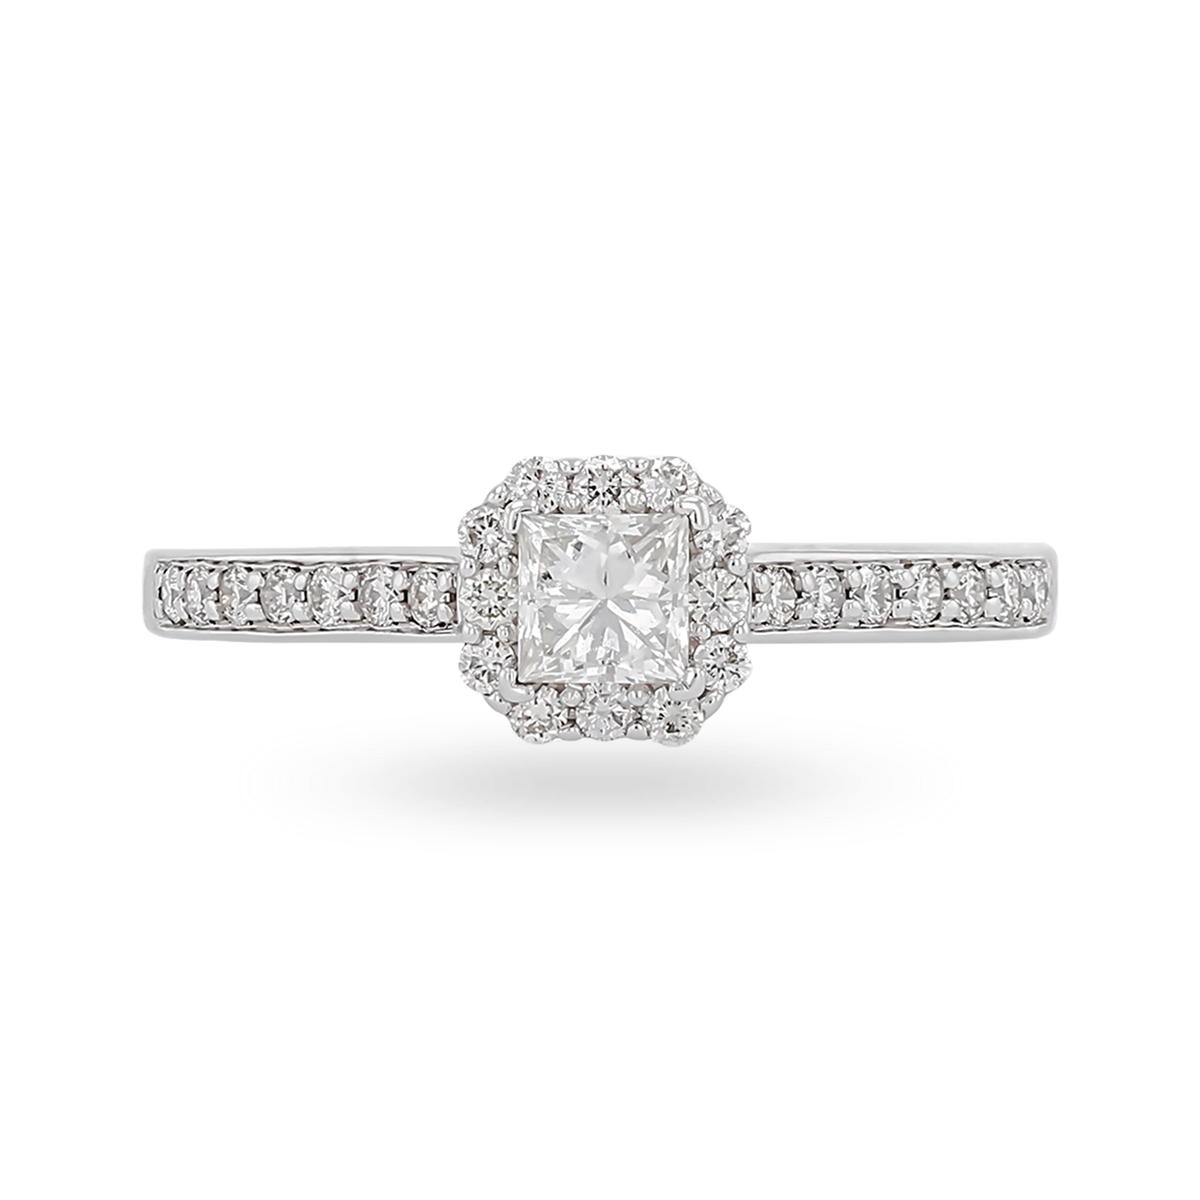 9ct White Gold Princess Cut Diamond Halo Solitaire Engagement Ring